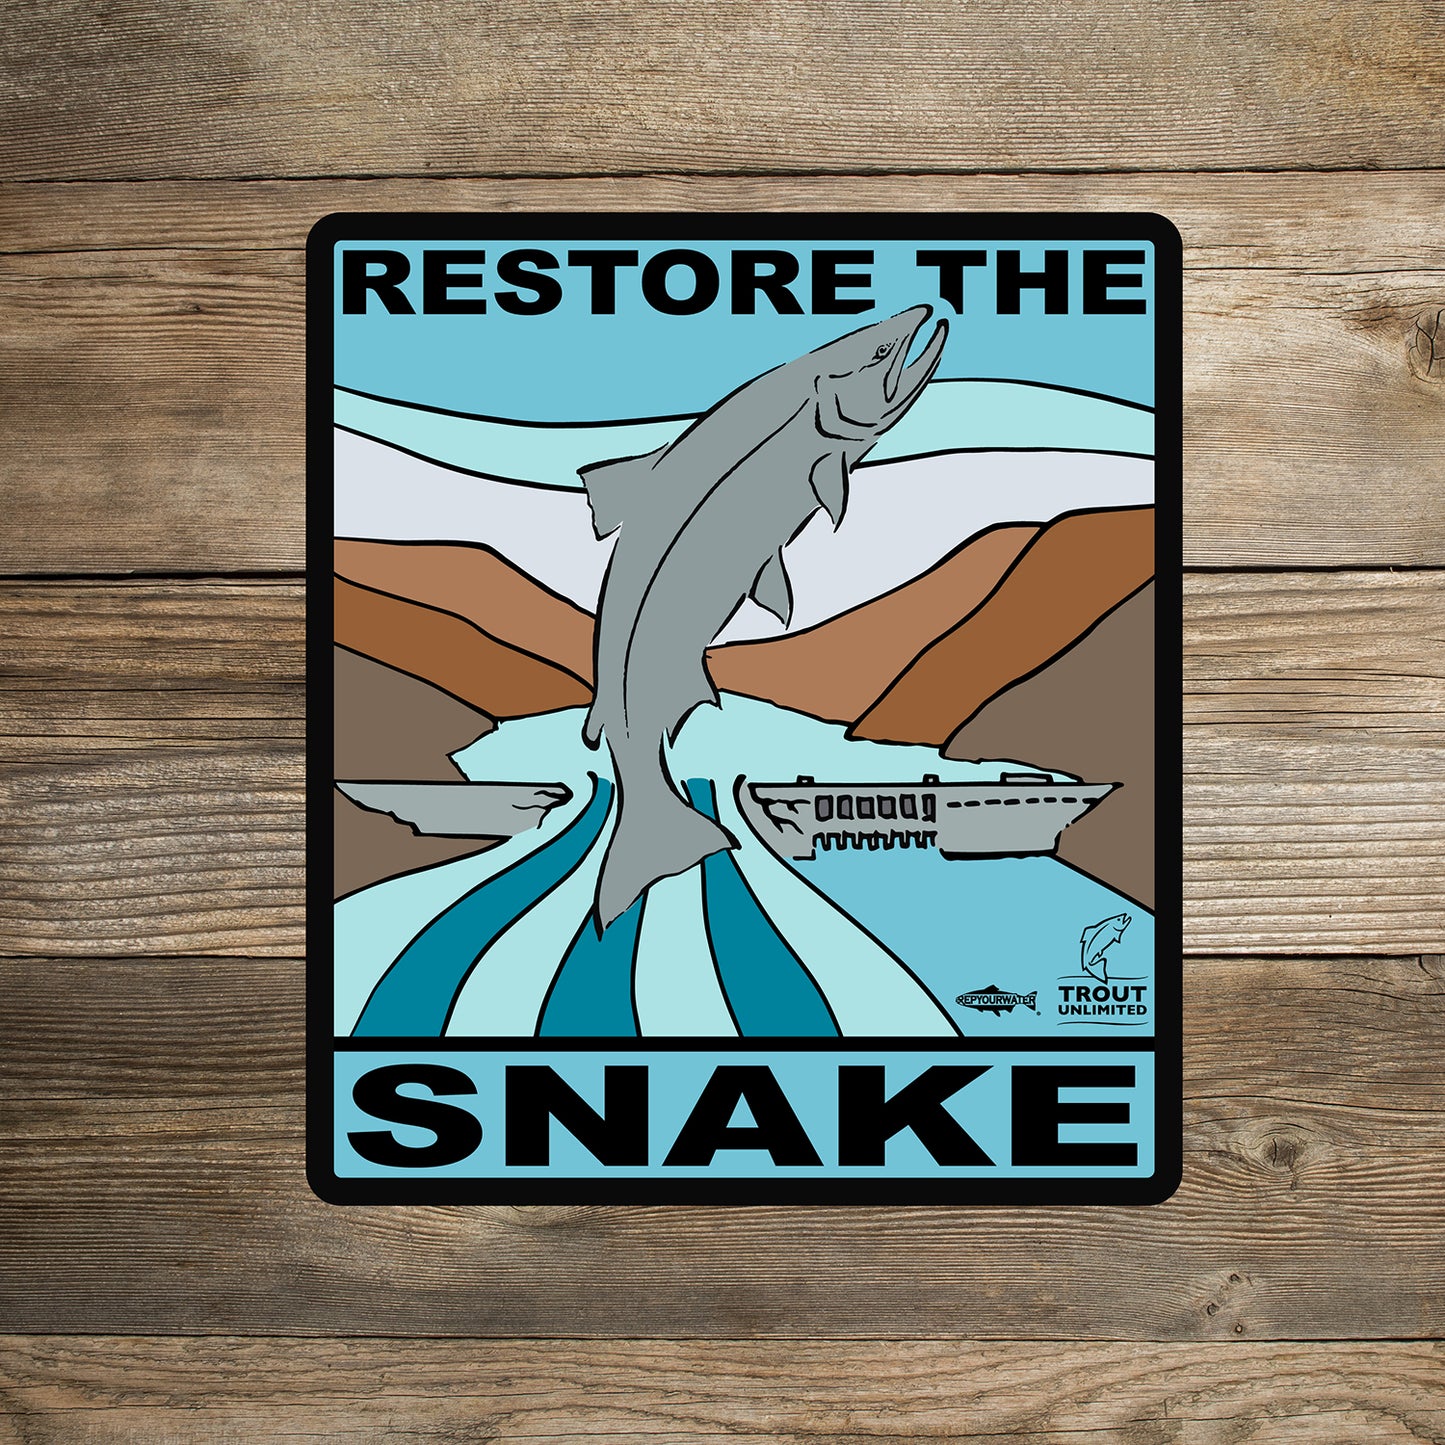 A sticker on a wood background reads restore the snake and features a fish jumping over a dam it features two logos one reads repyourwater inside a trout silhouette the other has a jumping trout over the words trout unlimited